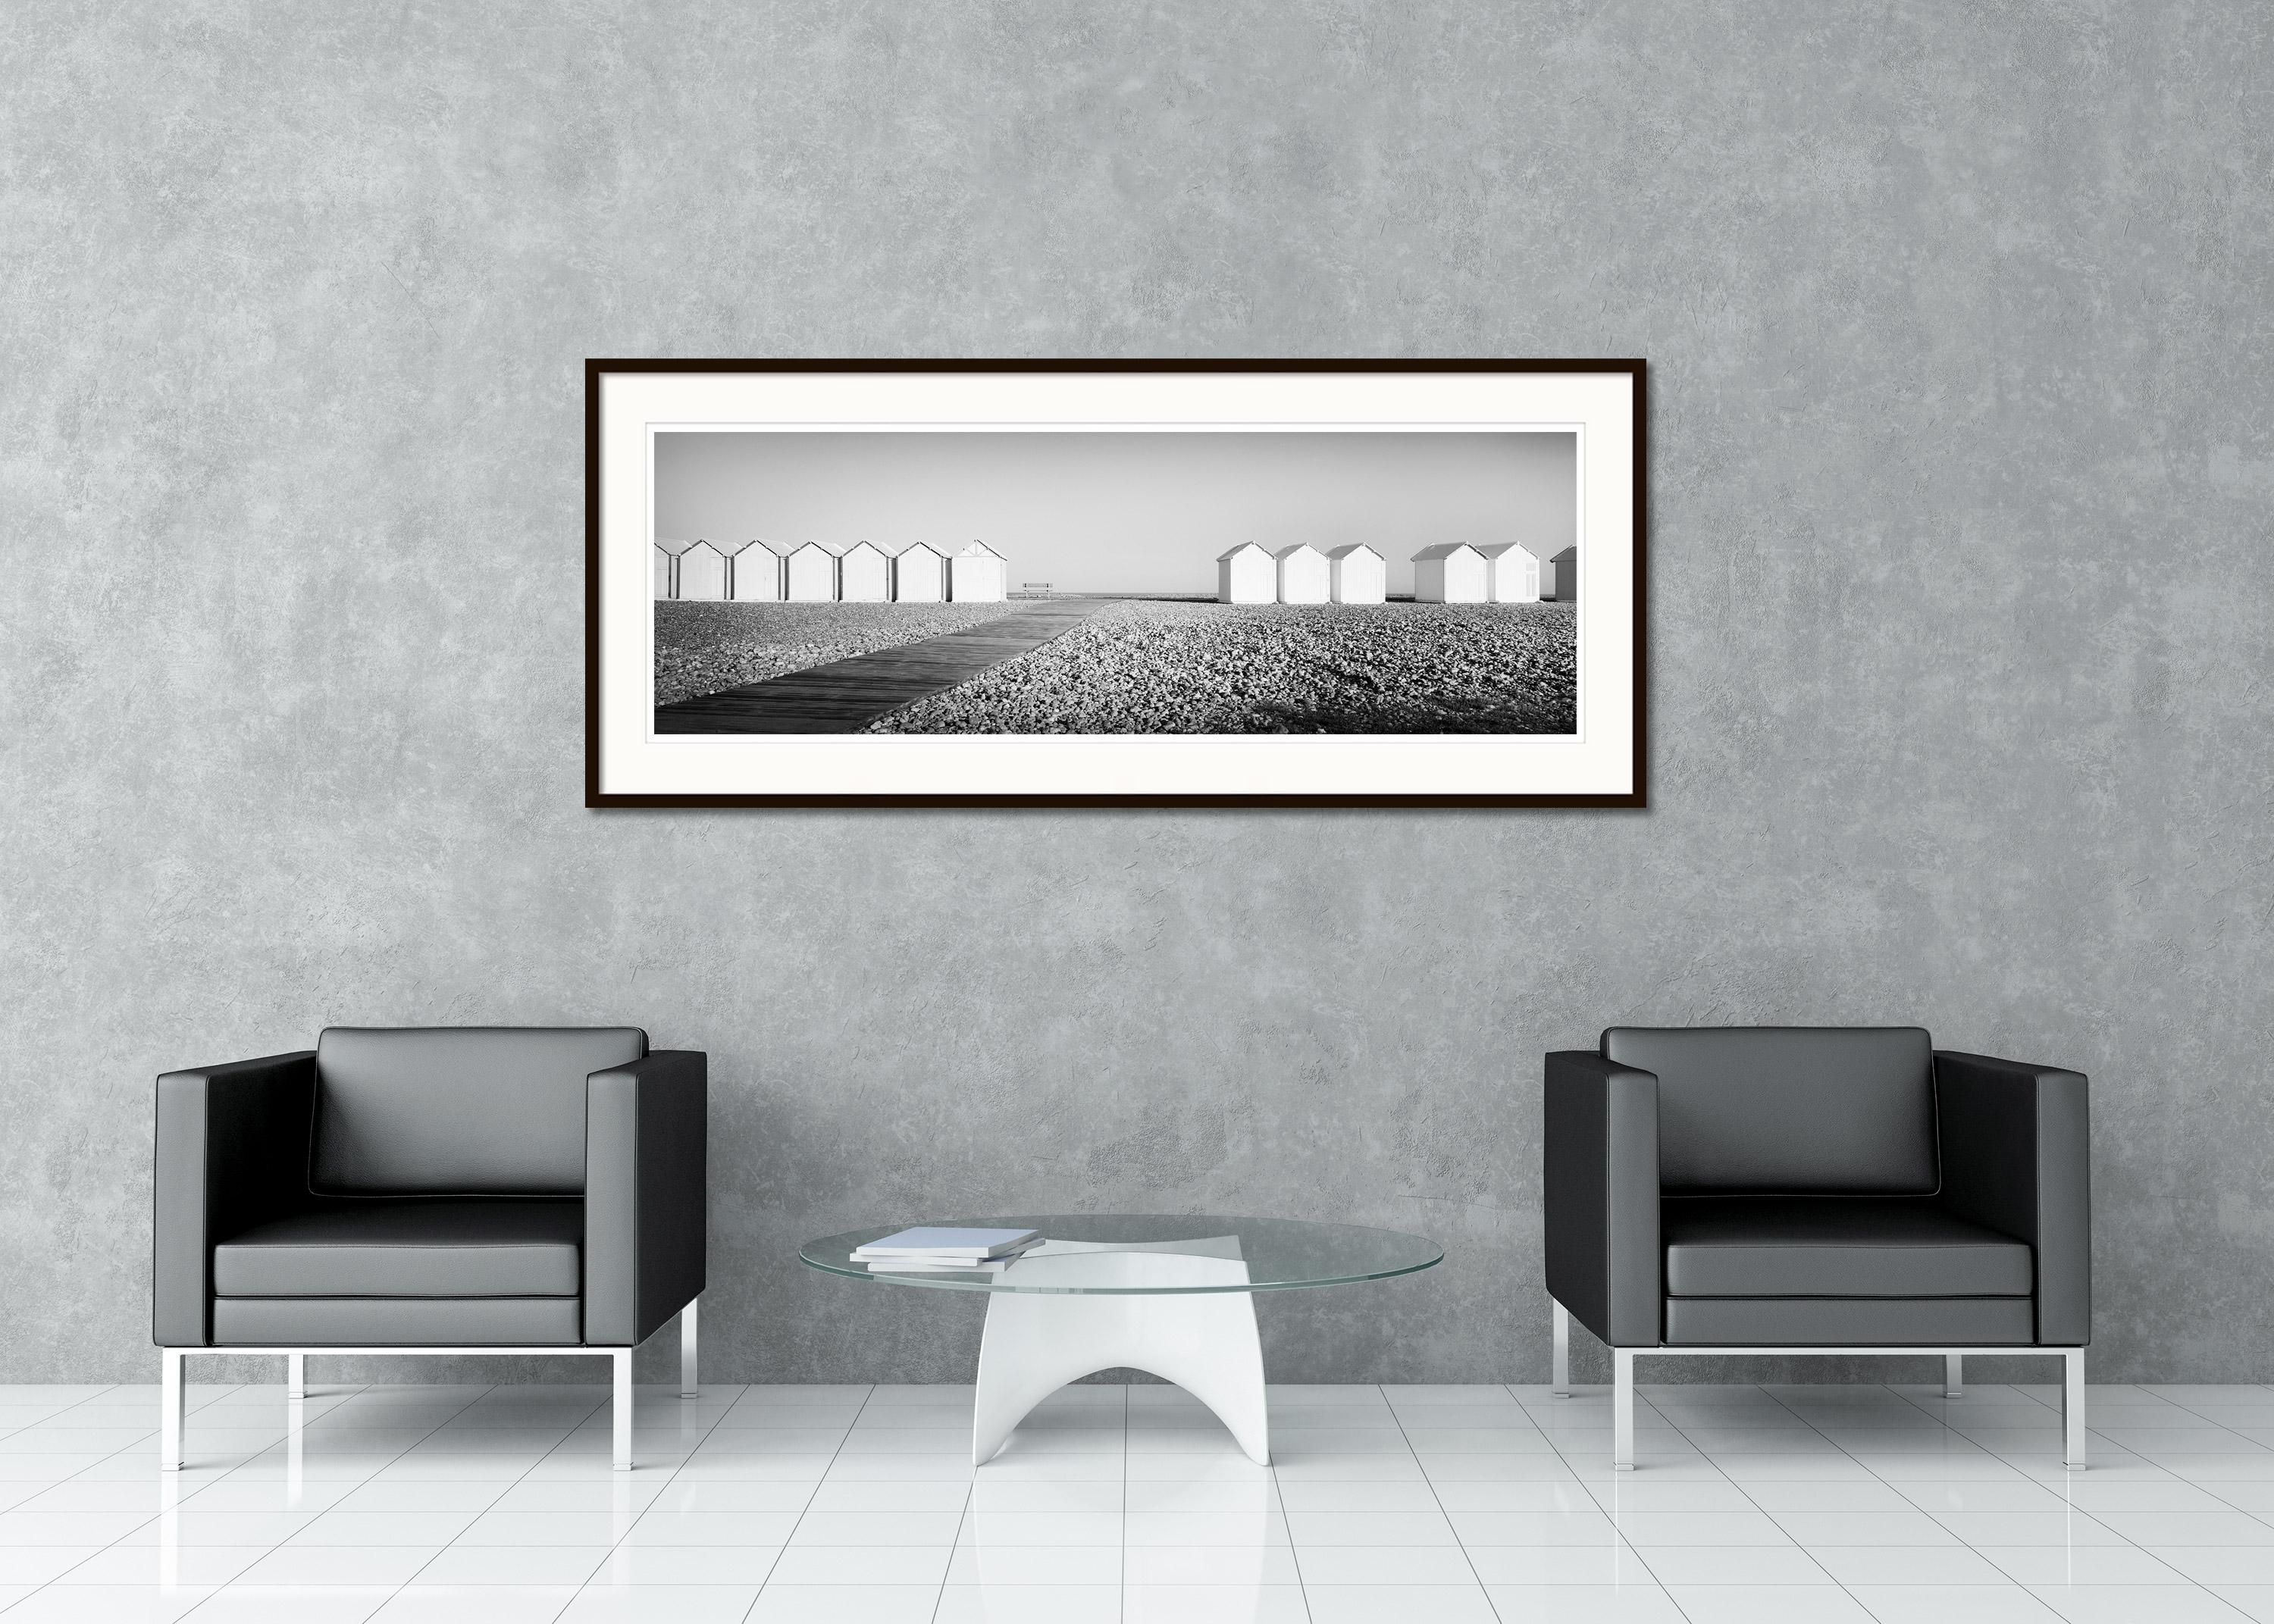 Black and White Fine Art Panorama photography - Beach huts on the beach with black stones, France. Archival pigment ink print, edition of 7. Signed, titled, dated and numbered by artist. Certificate of authenticity included. Printed with 4cm white